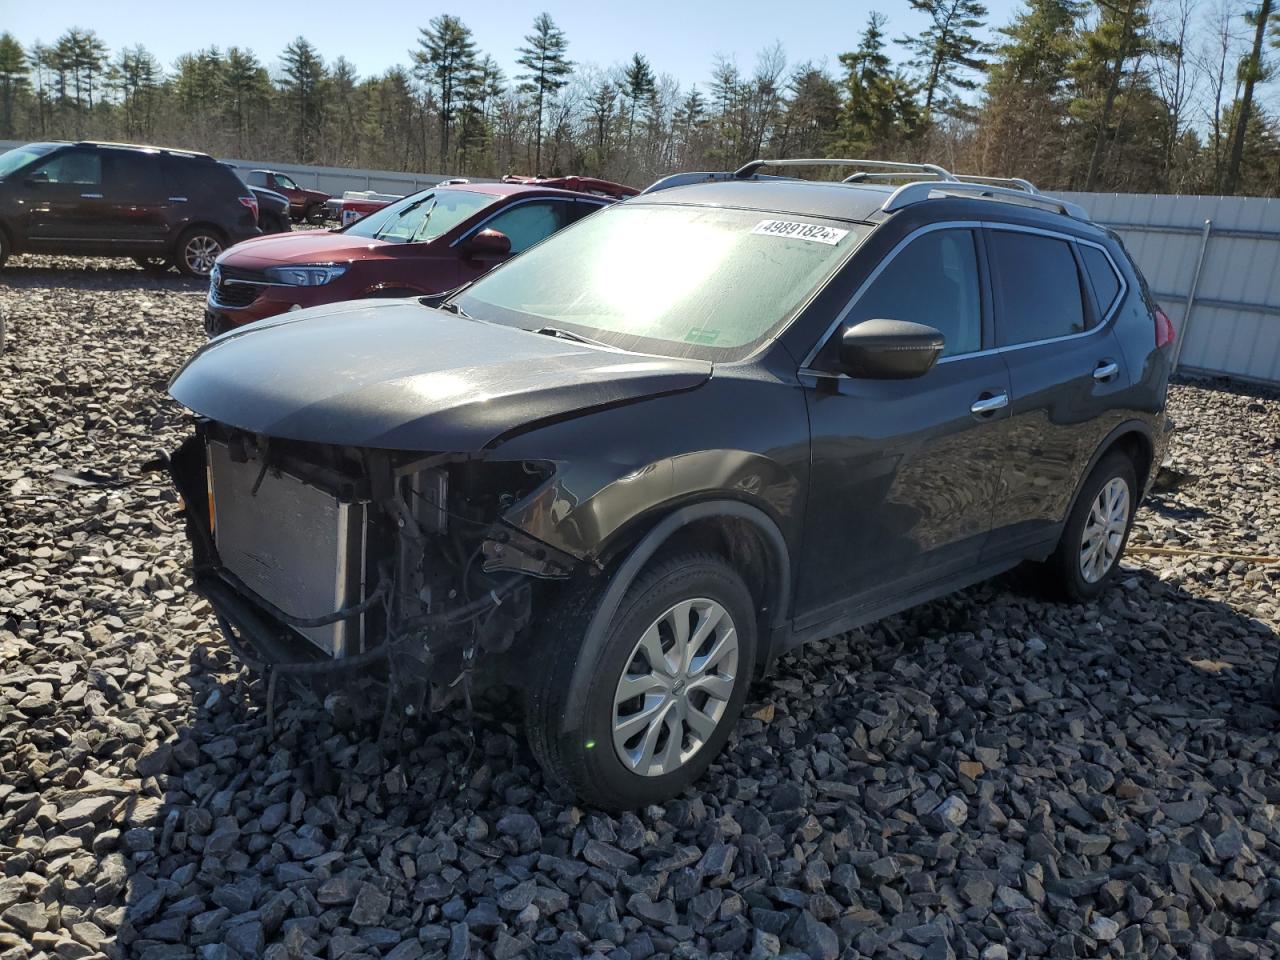 vin: KNMAT2MVXHP586965 KNMAT2MVXHP586965 2017 nissan rogue 2500 for Sale in 04062, Me - Windham, Windham, Maine, USA